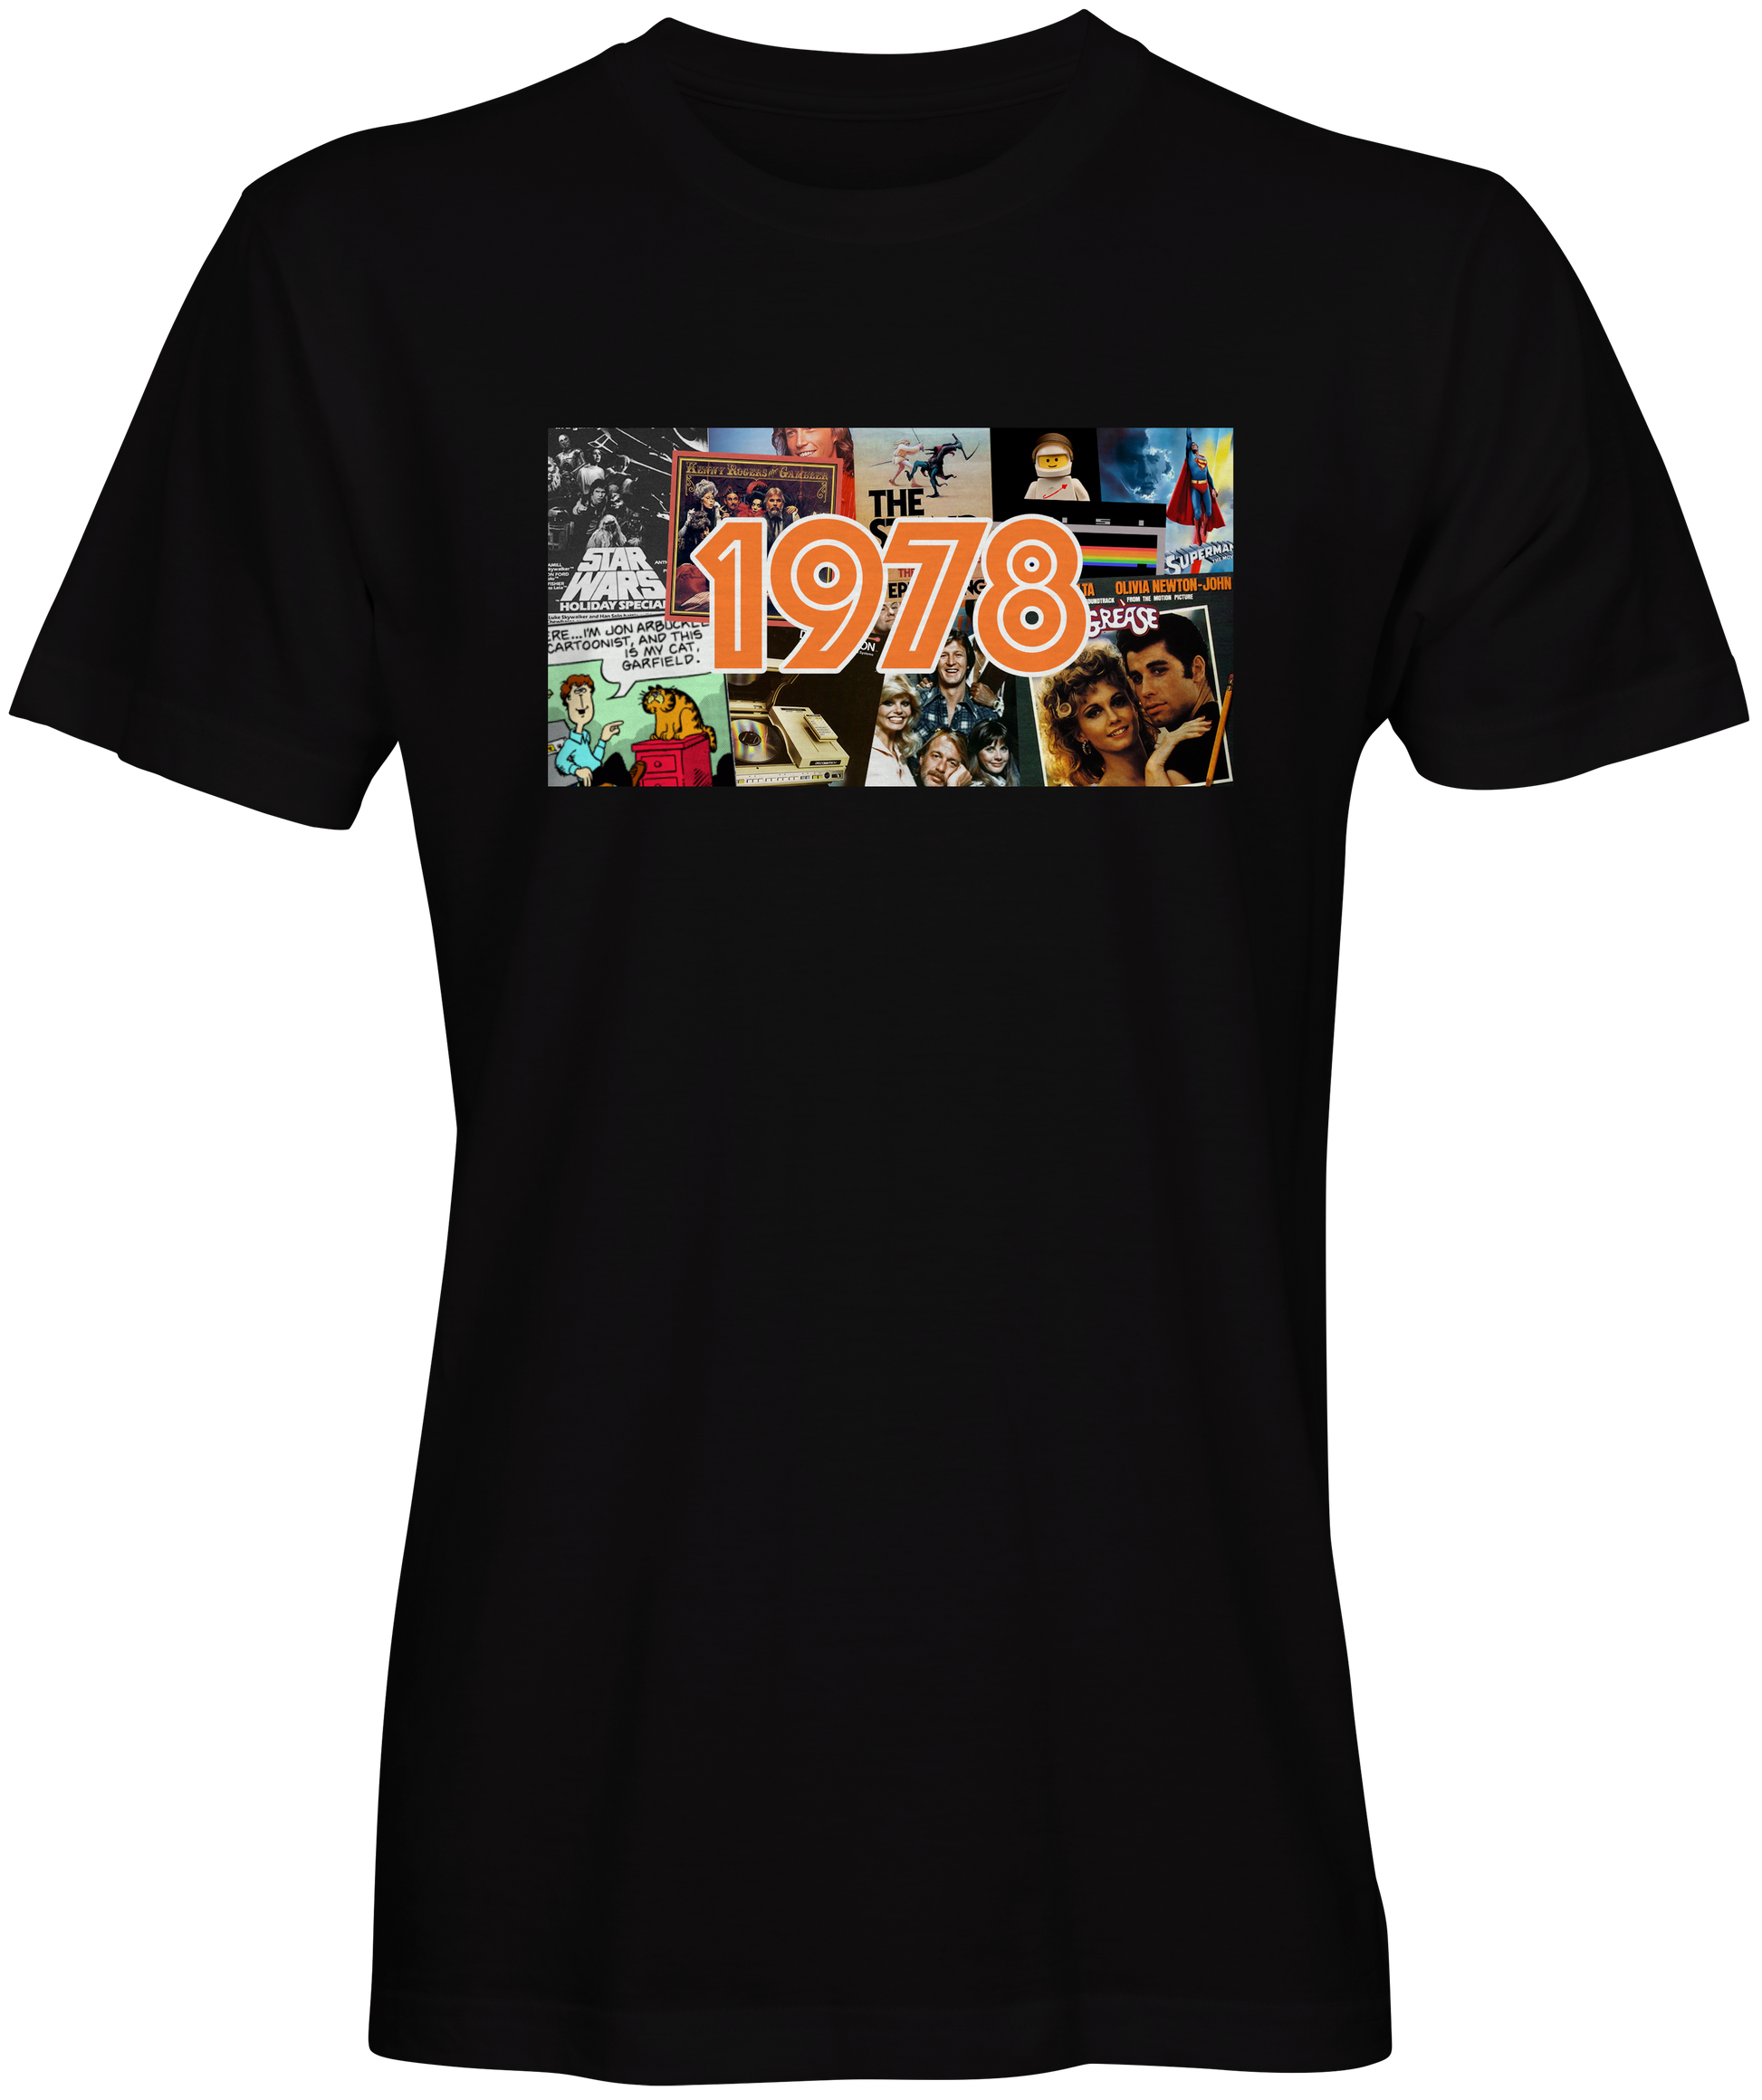 Remembering the year 1978 Black T-shirt